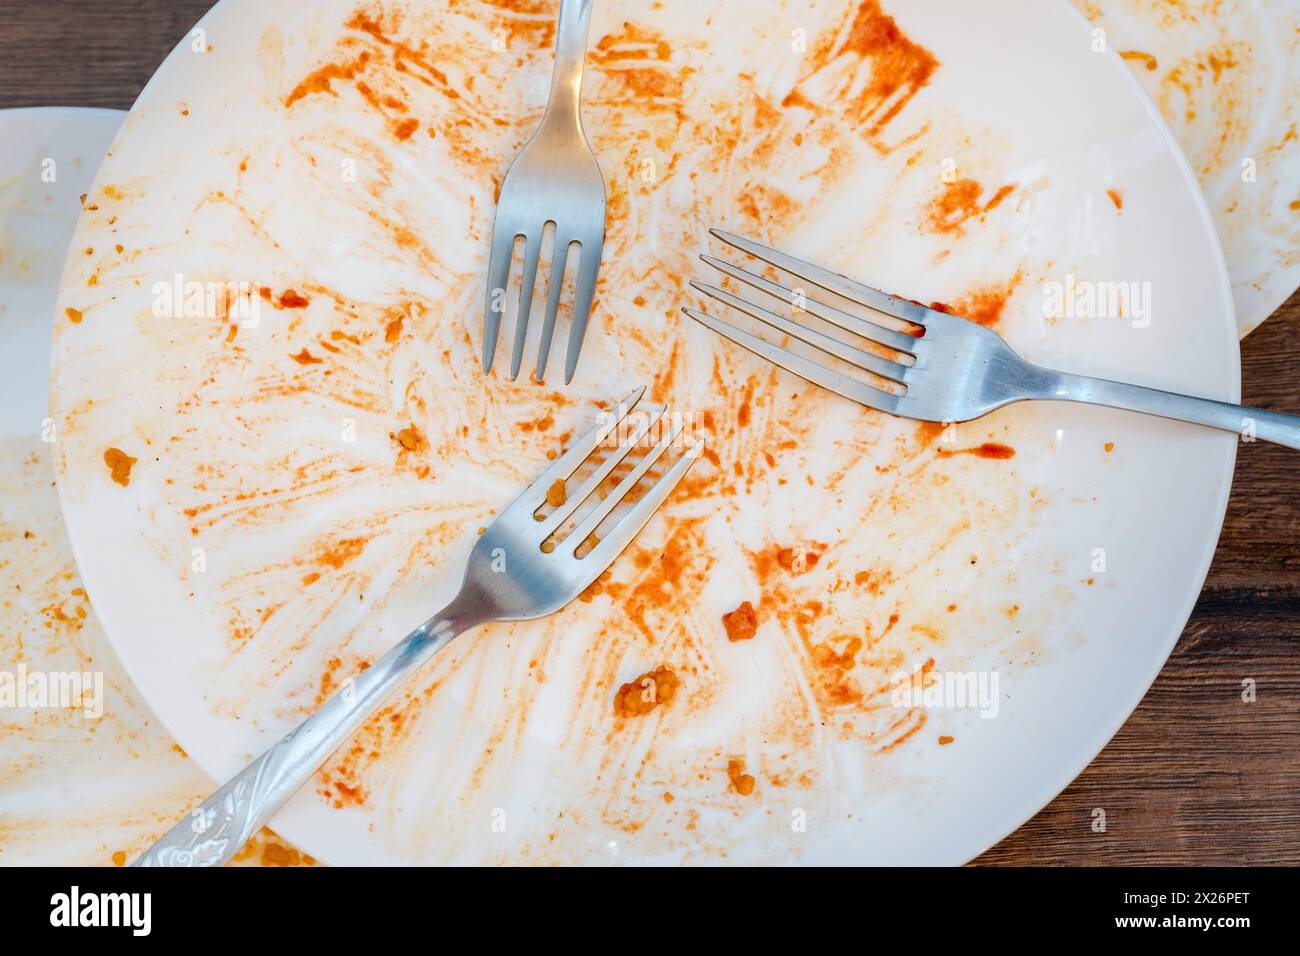 dirty plates after eating. Cutlery. forks on a plate. Dirty dishes after eating. End of meal. Good appetite, delicious food and dish concept Stock Photo